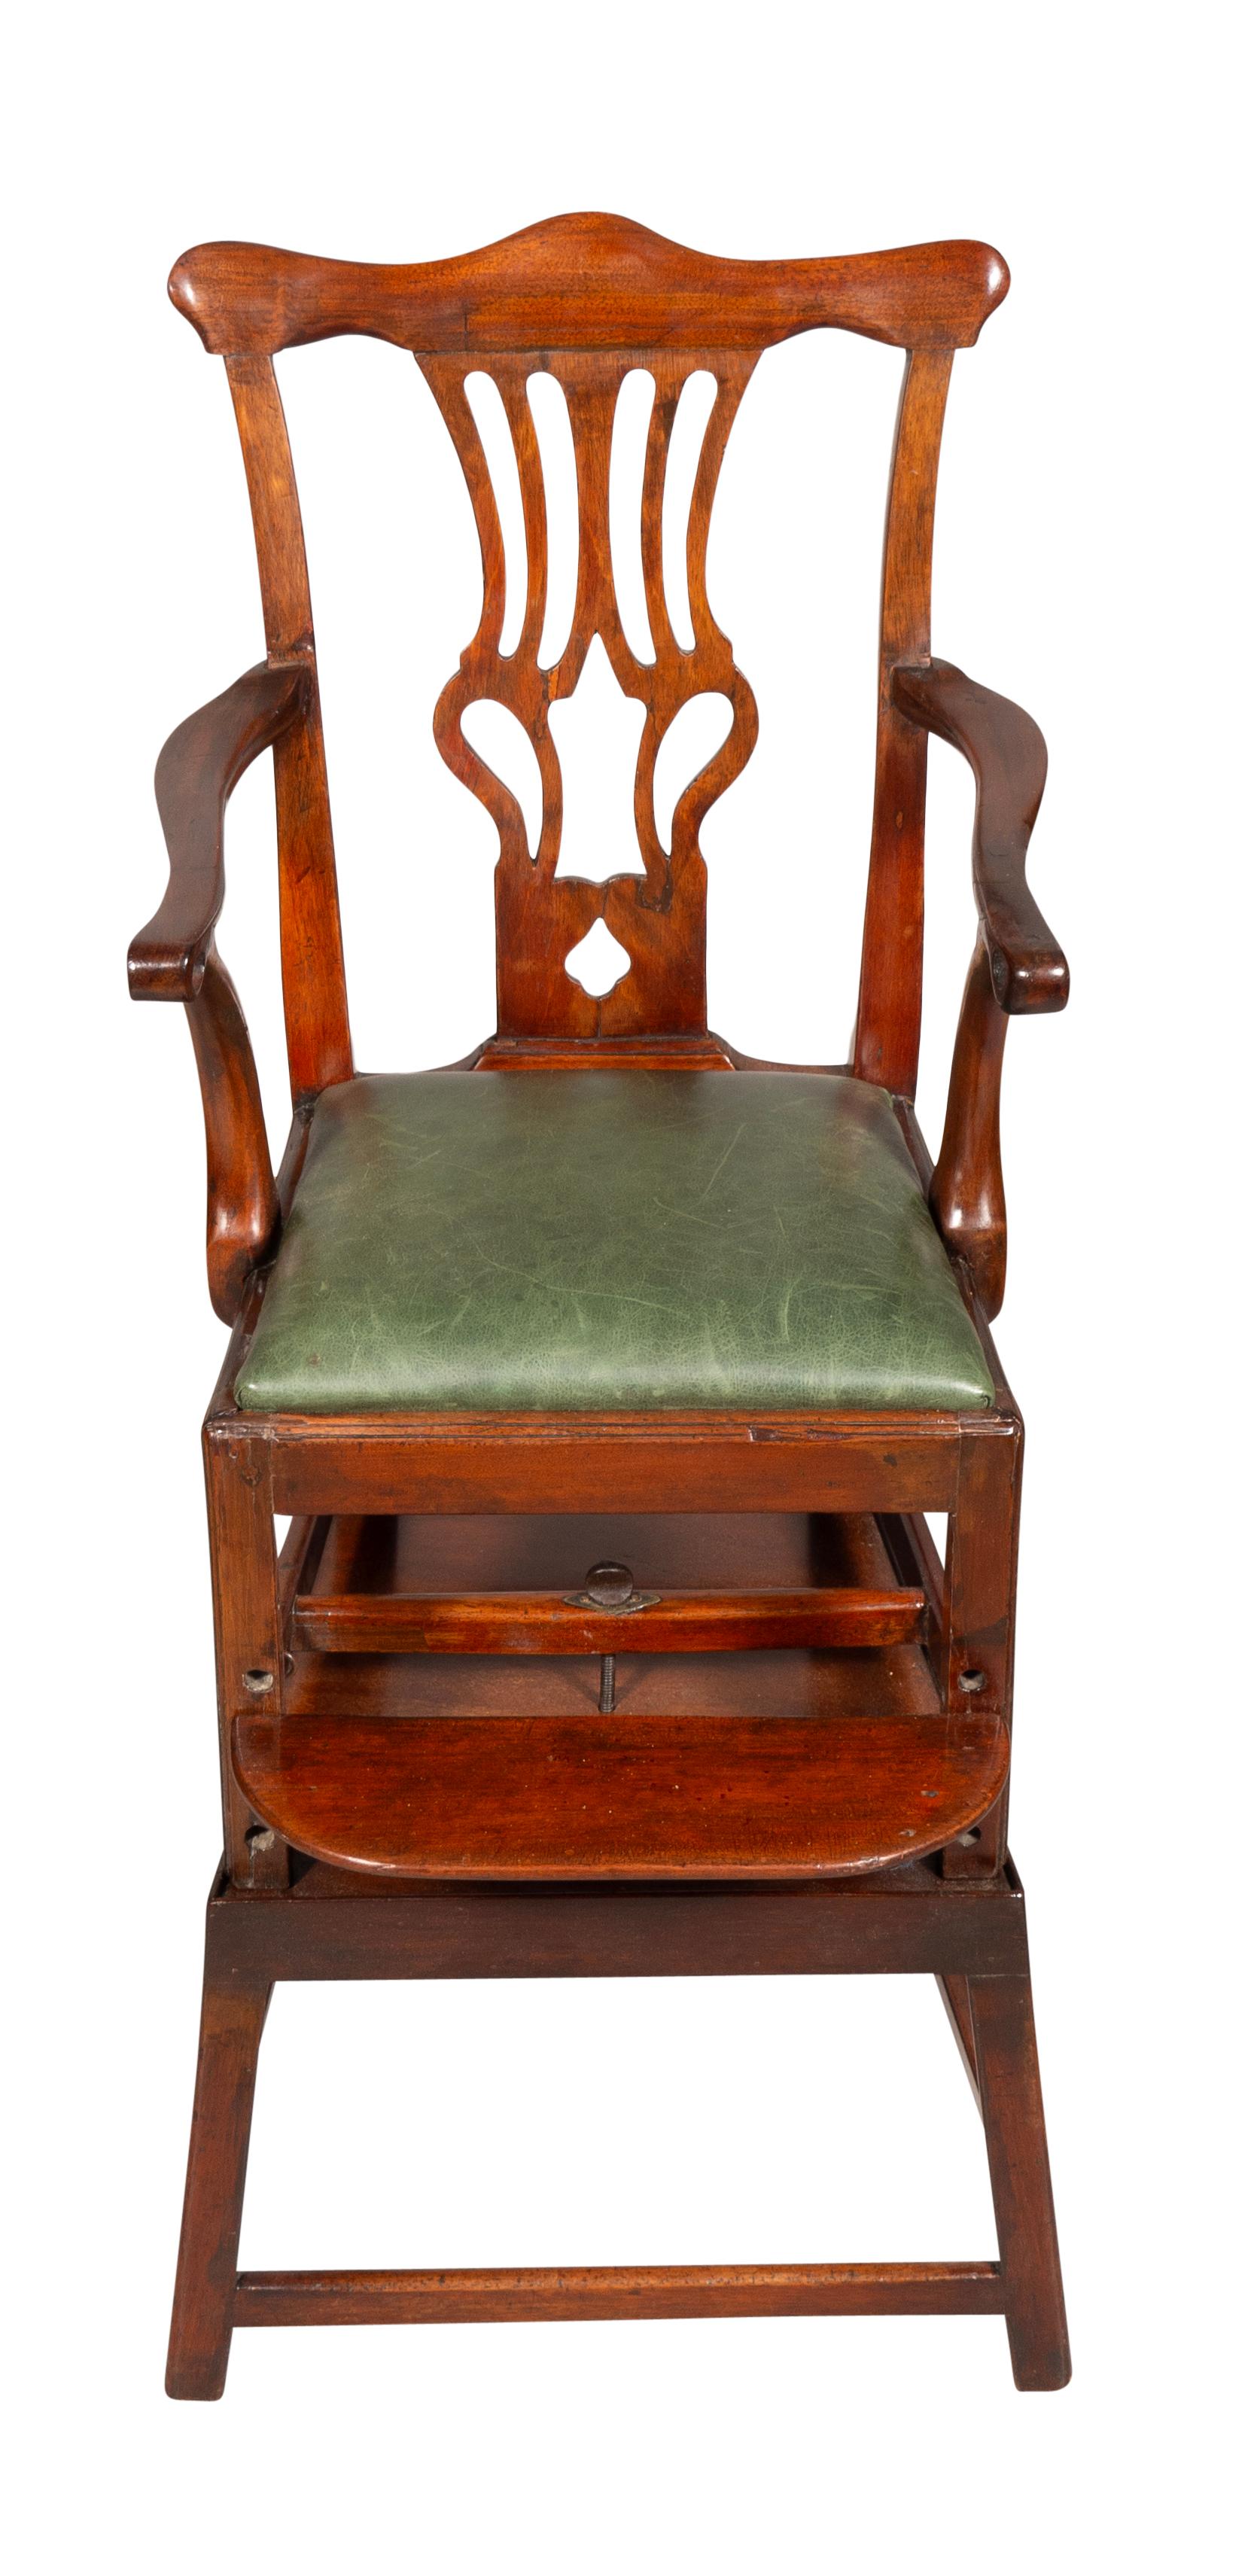 With serpentine crest rail over a pierced splat, drop in seat, square legs and stretcher and foot rest. Raised on a base with square section legs.